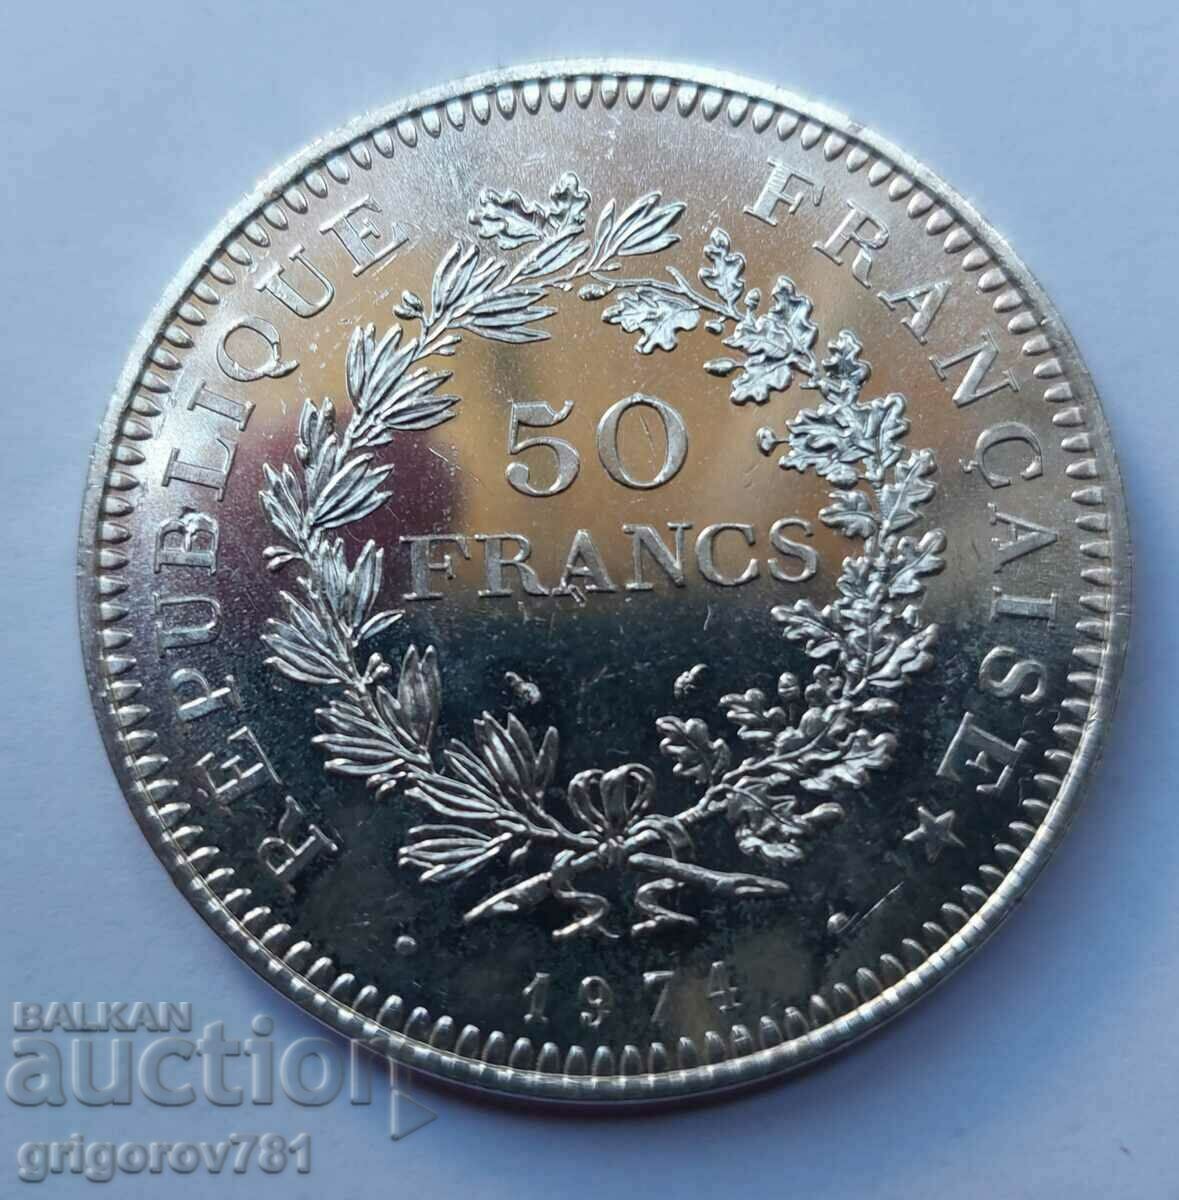 50 Francs Silver France 1974 - Silver Coin #19